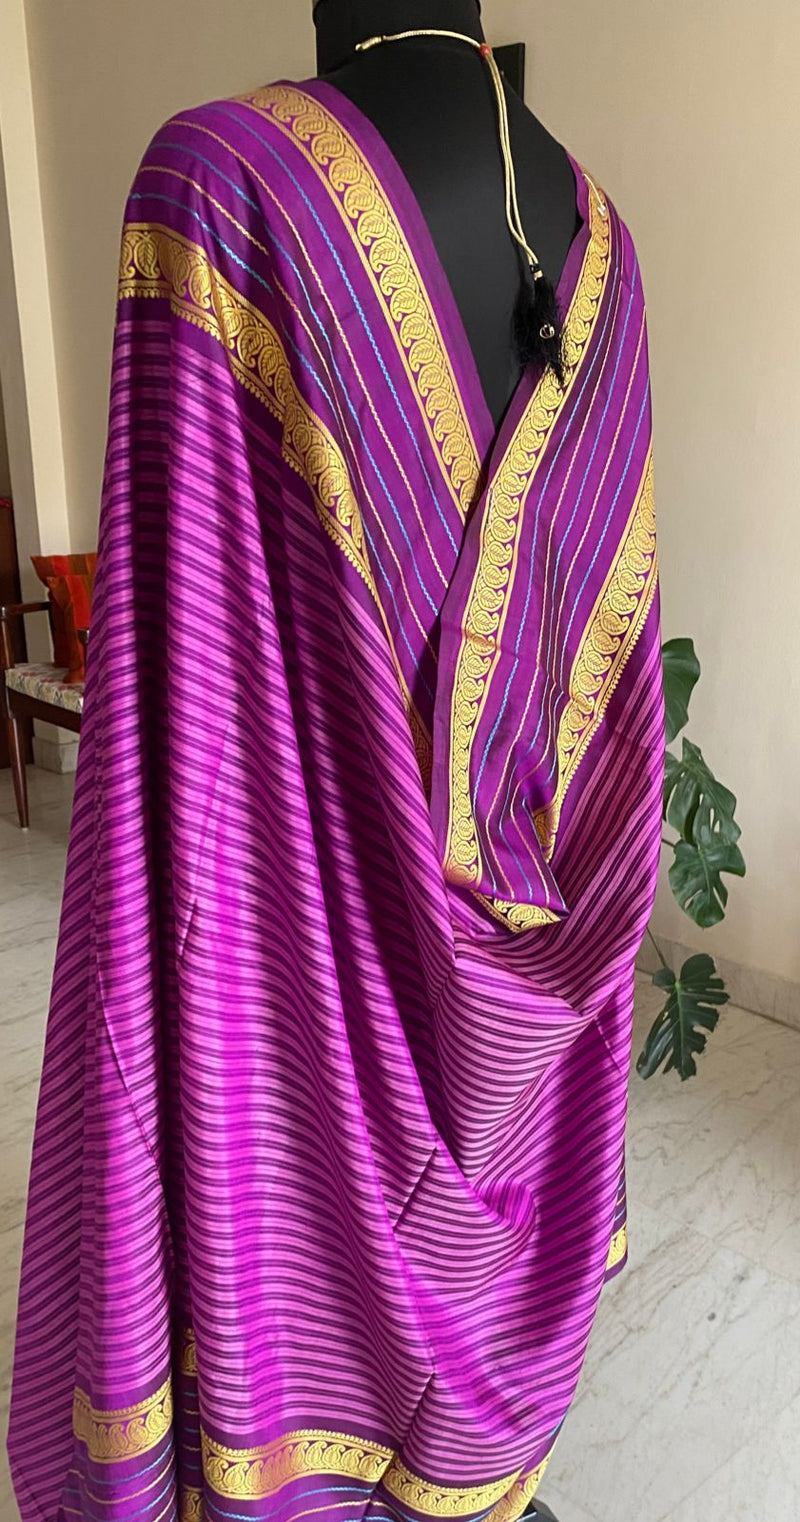 MAANVI- AN UNUSUAL SOFT MADURAI SILK SAREE  IN LIGHT AND DARK PURPLE STRIPES AND WOVEN BORDER AND AANCHAL